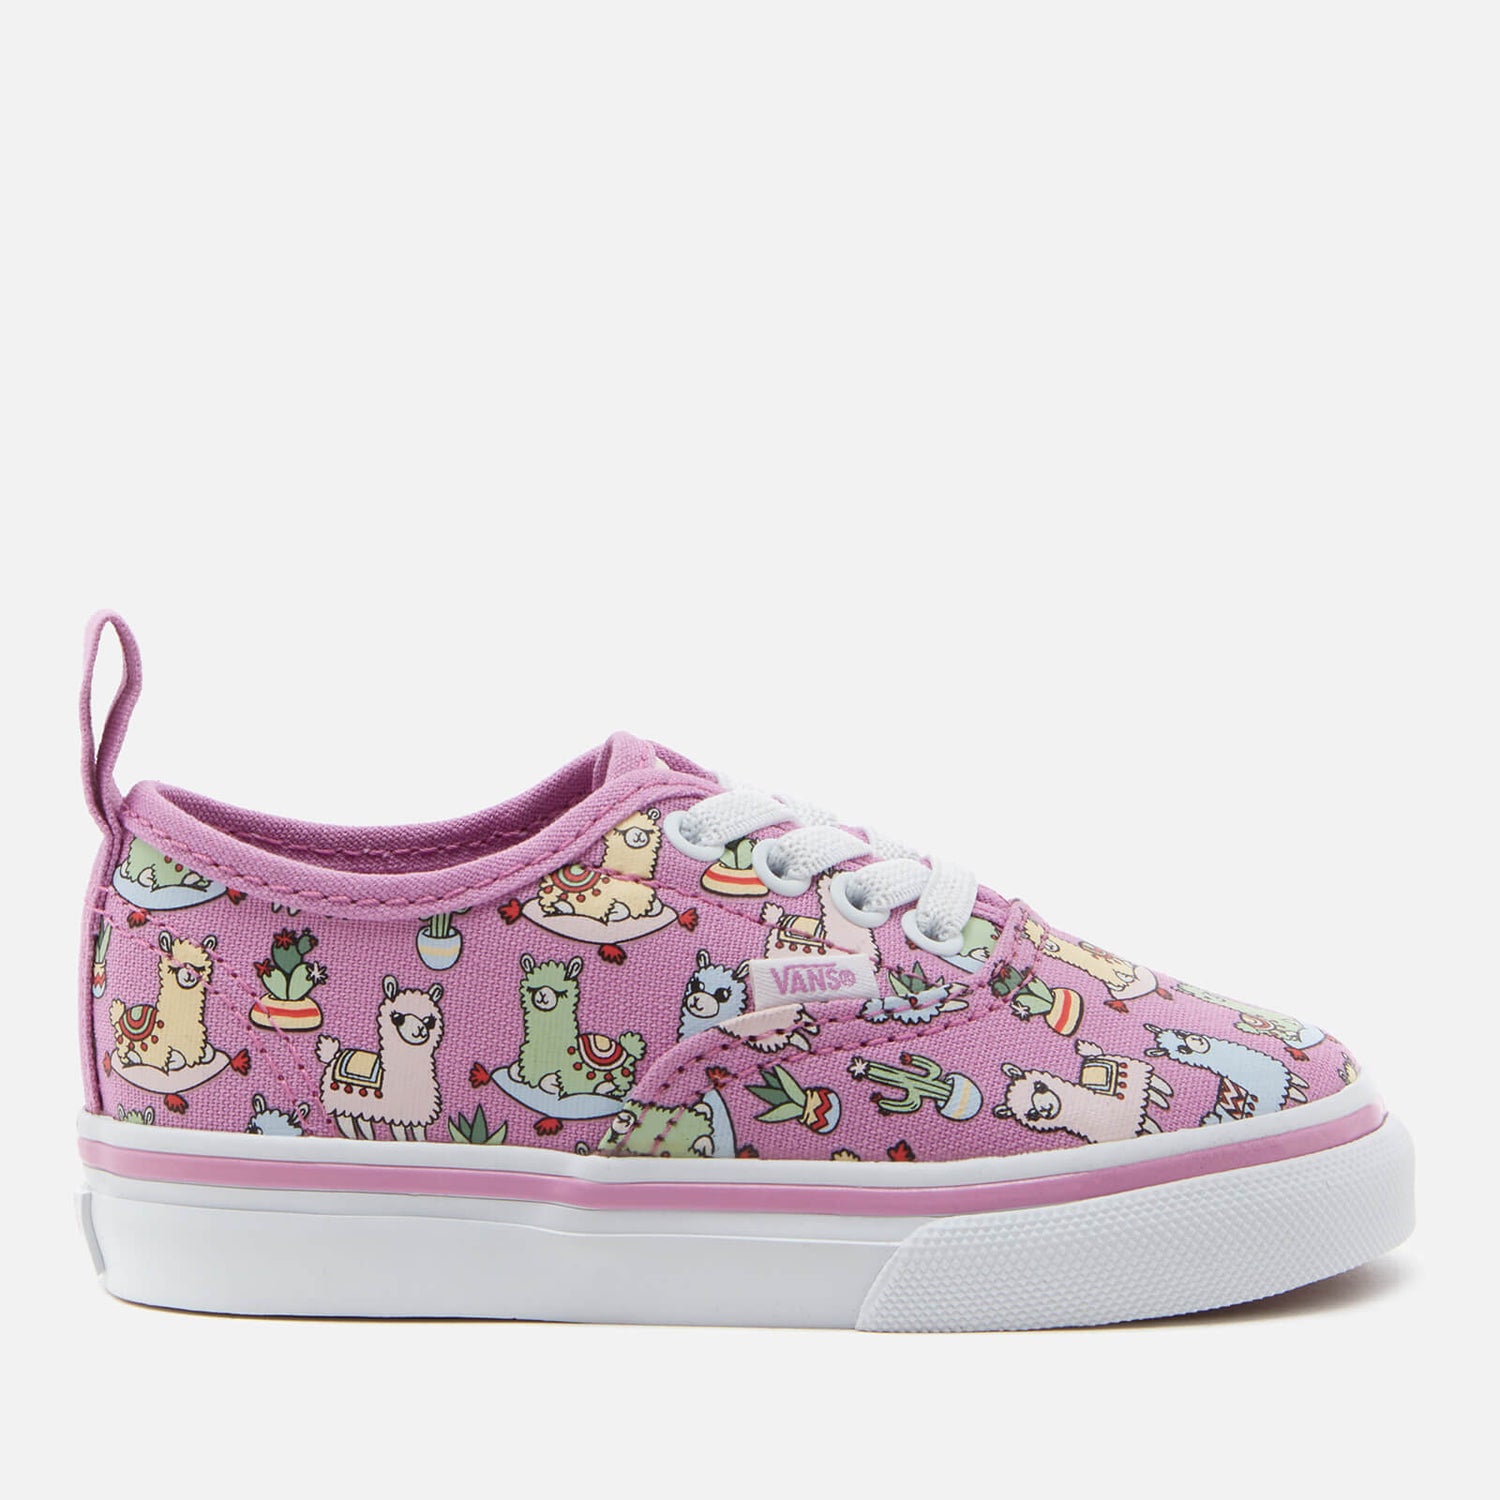 Vans Toddlers' Elastic Lace Llama Trainers - Orchid